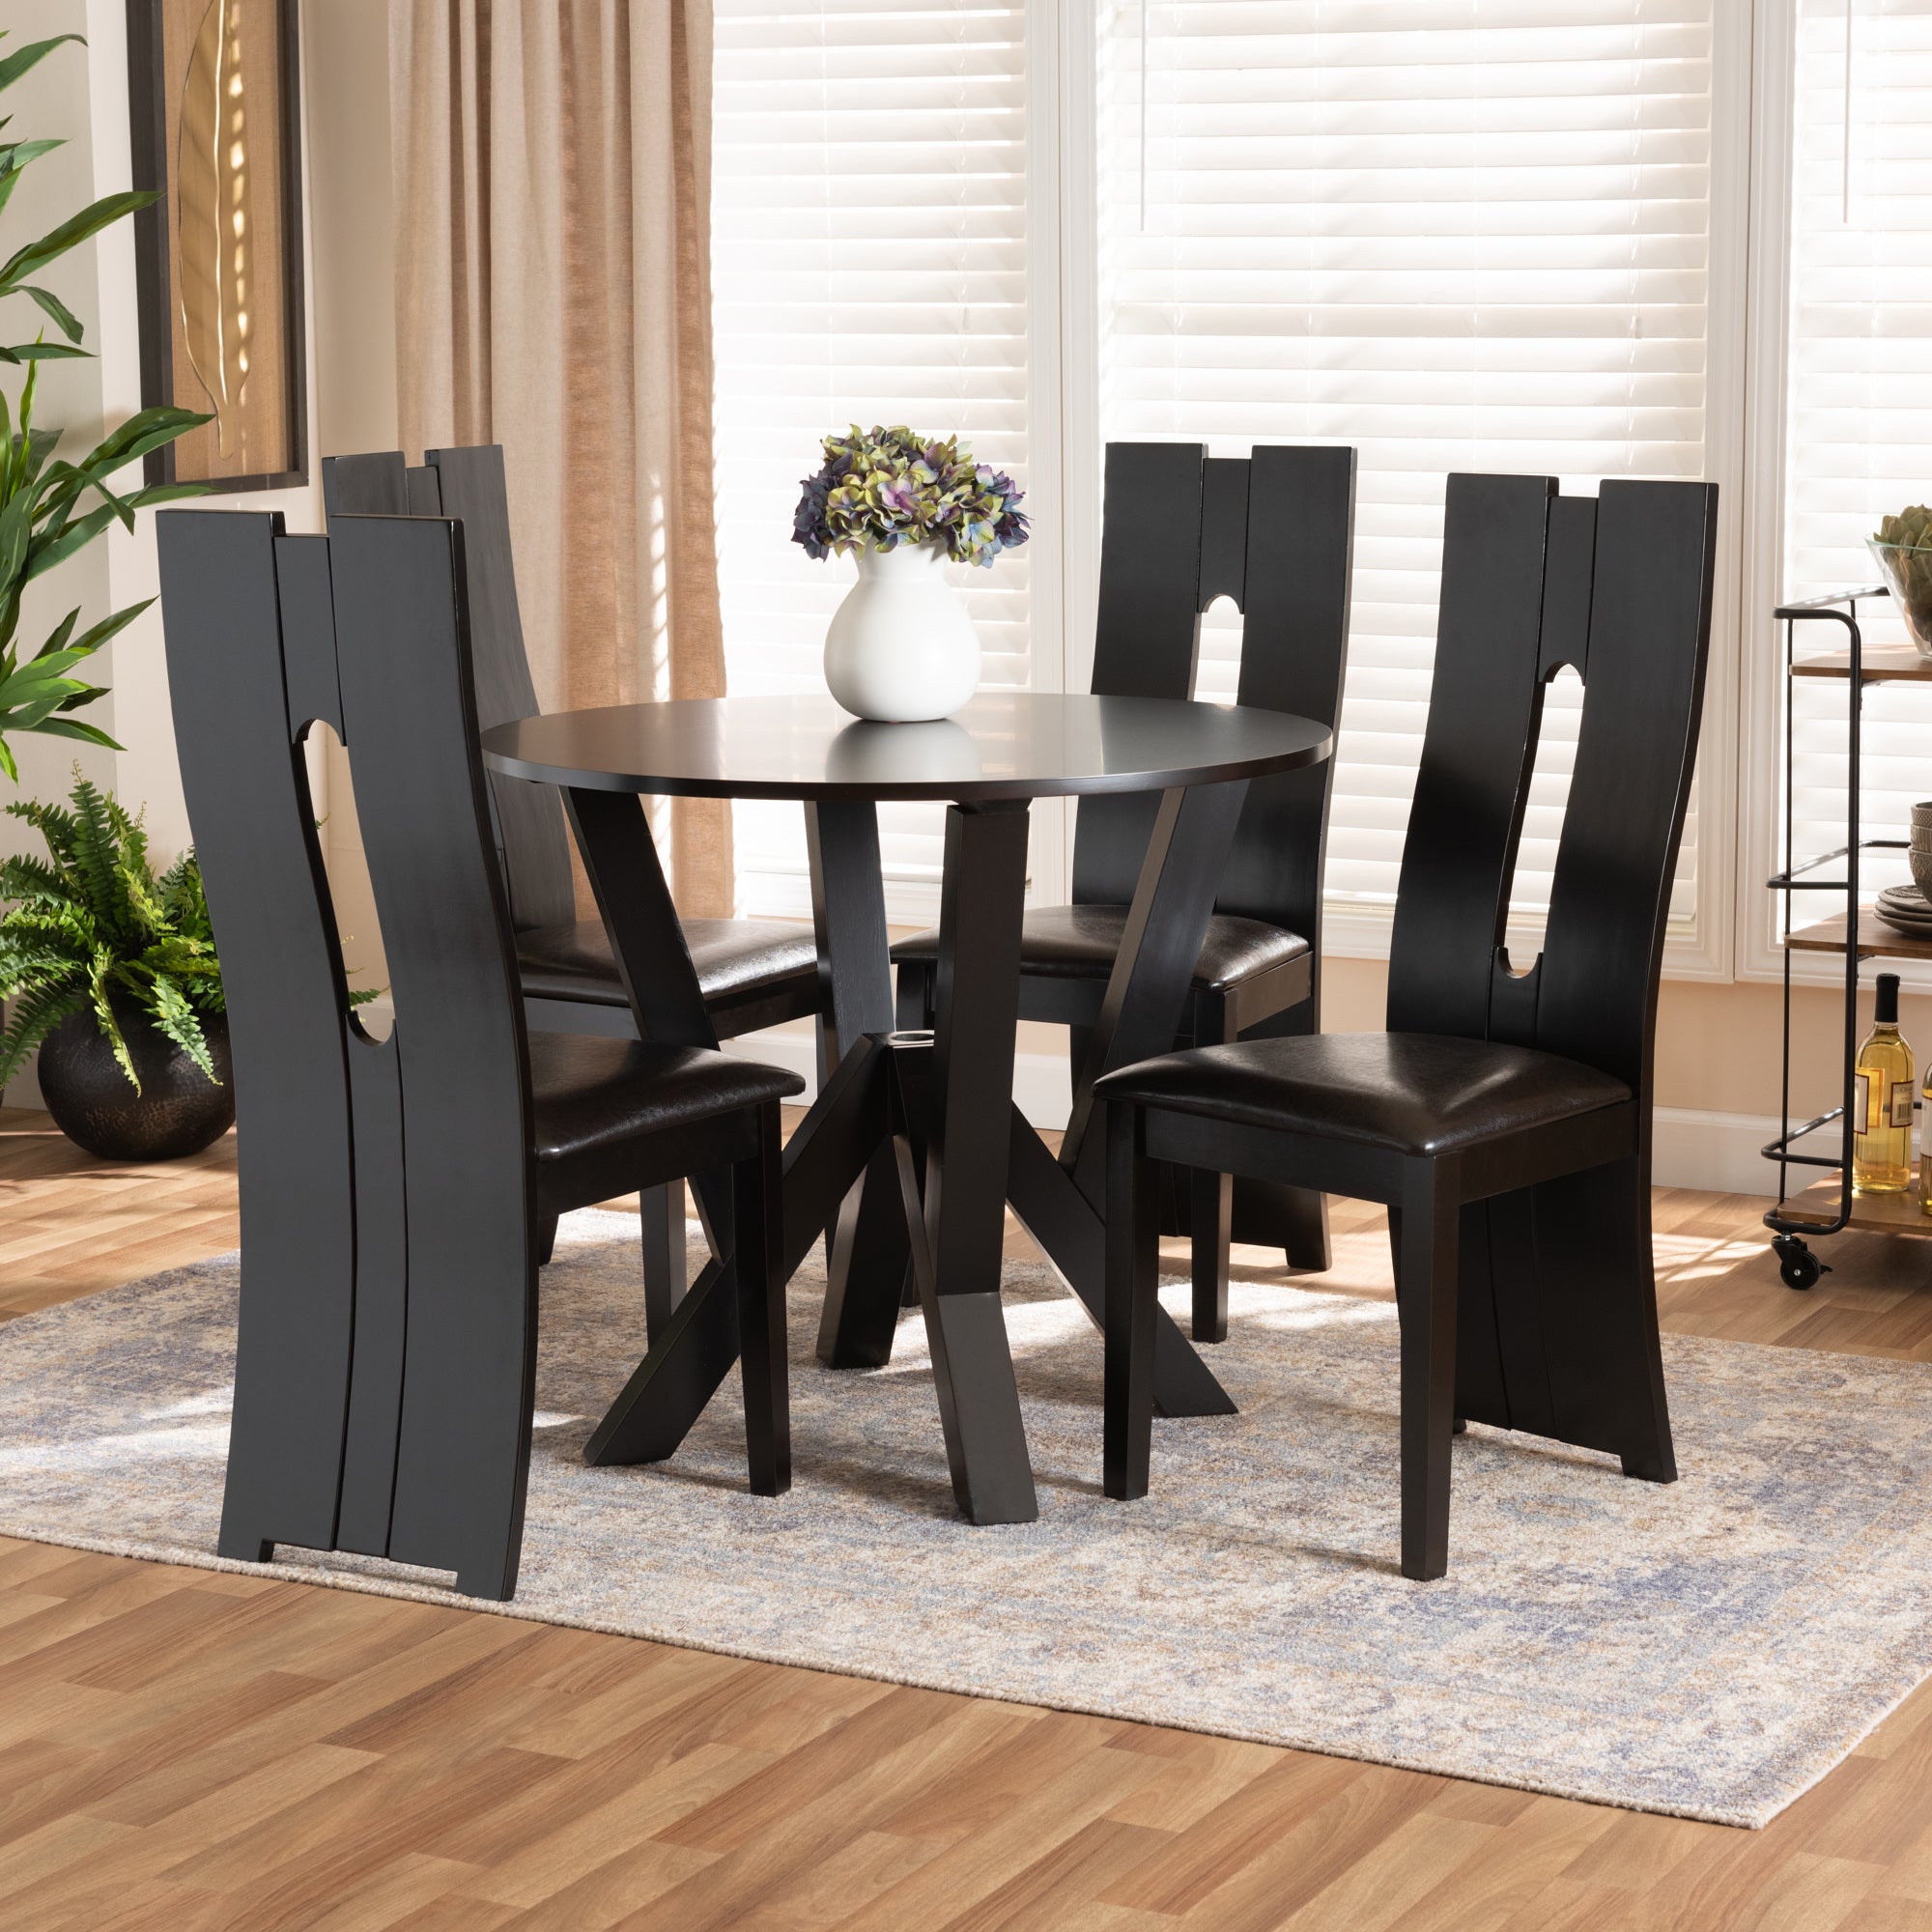 Senan Modern Table & Dining Chairs 5-Piece